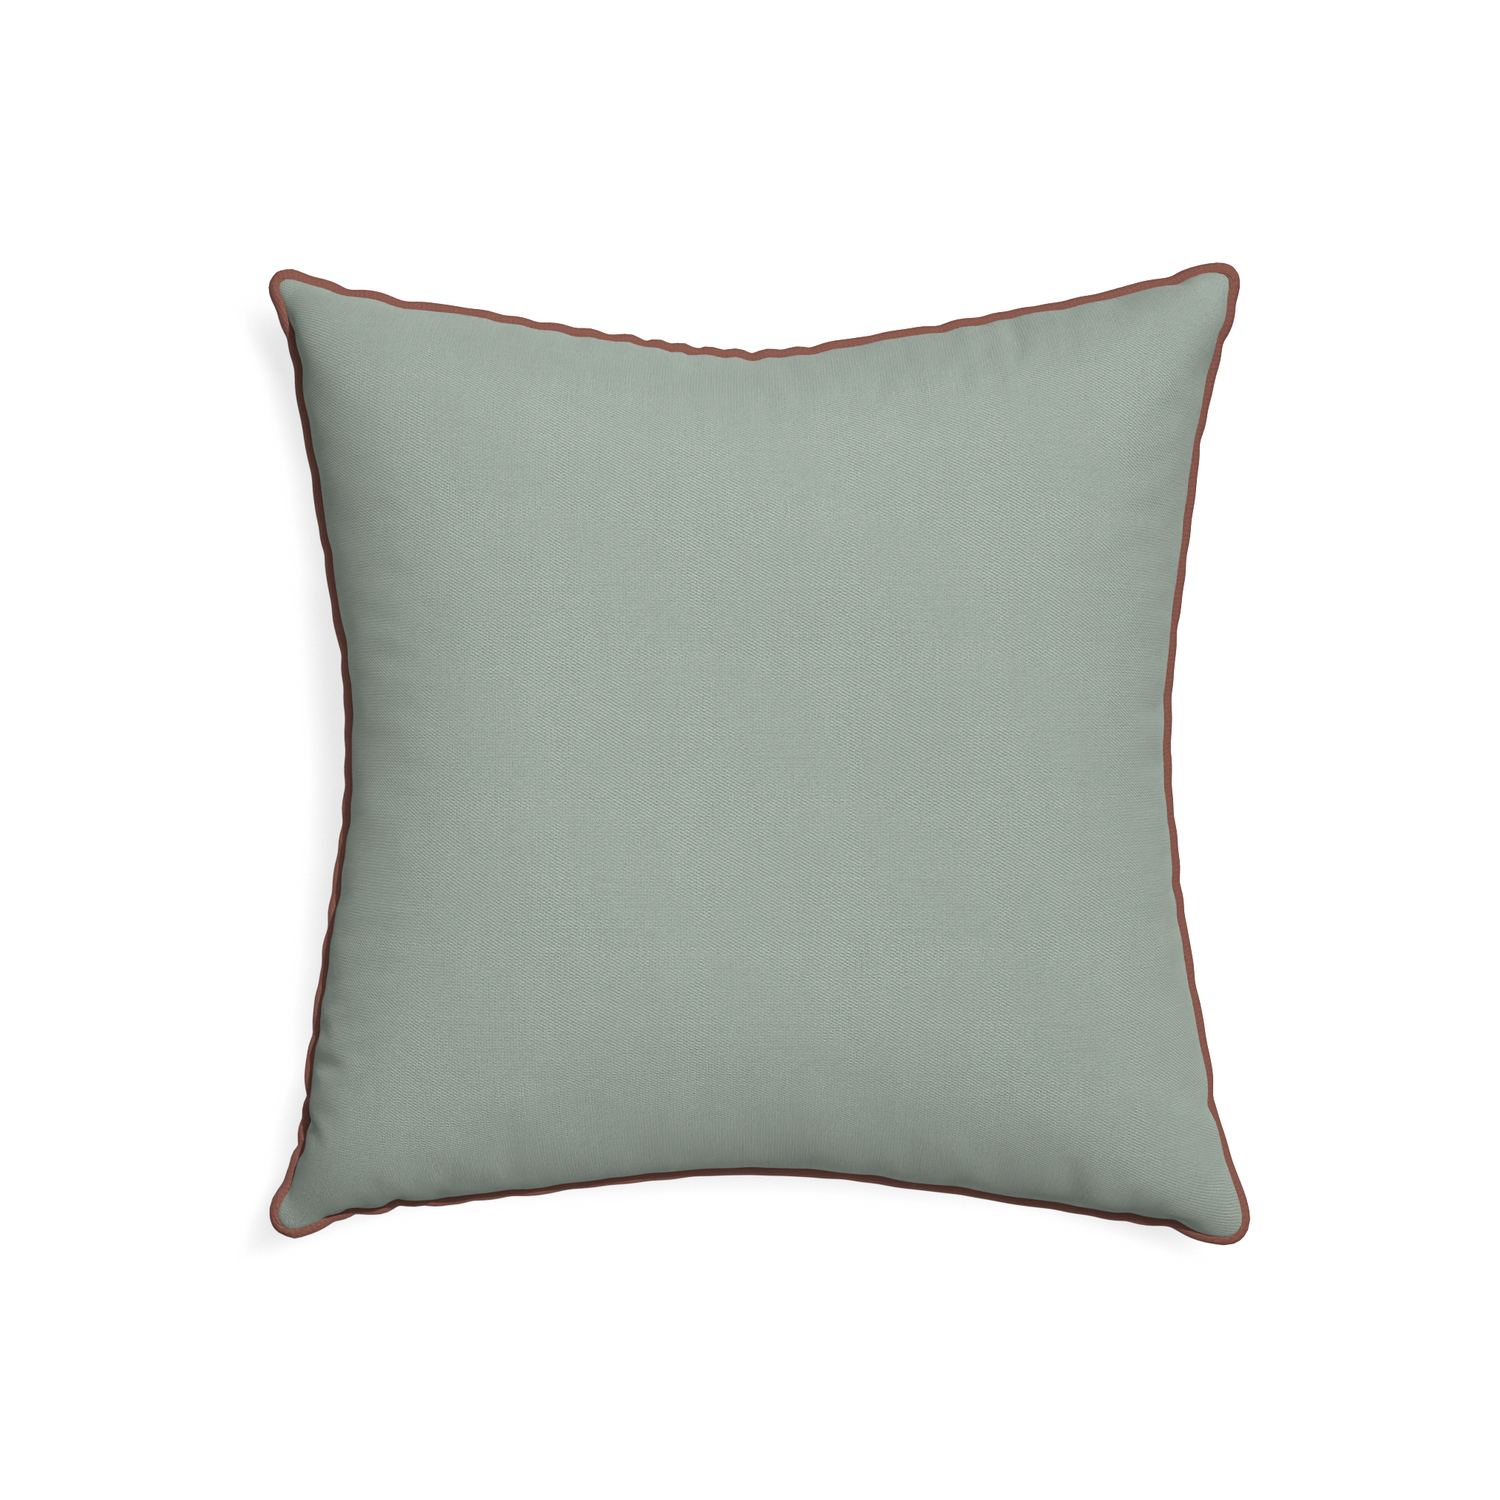 22-square sage custom pillow with w piping on white background